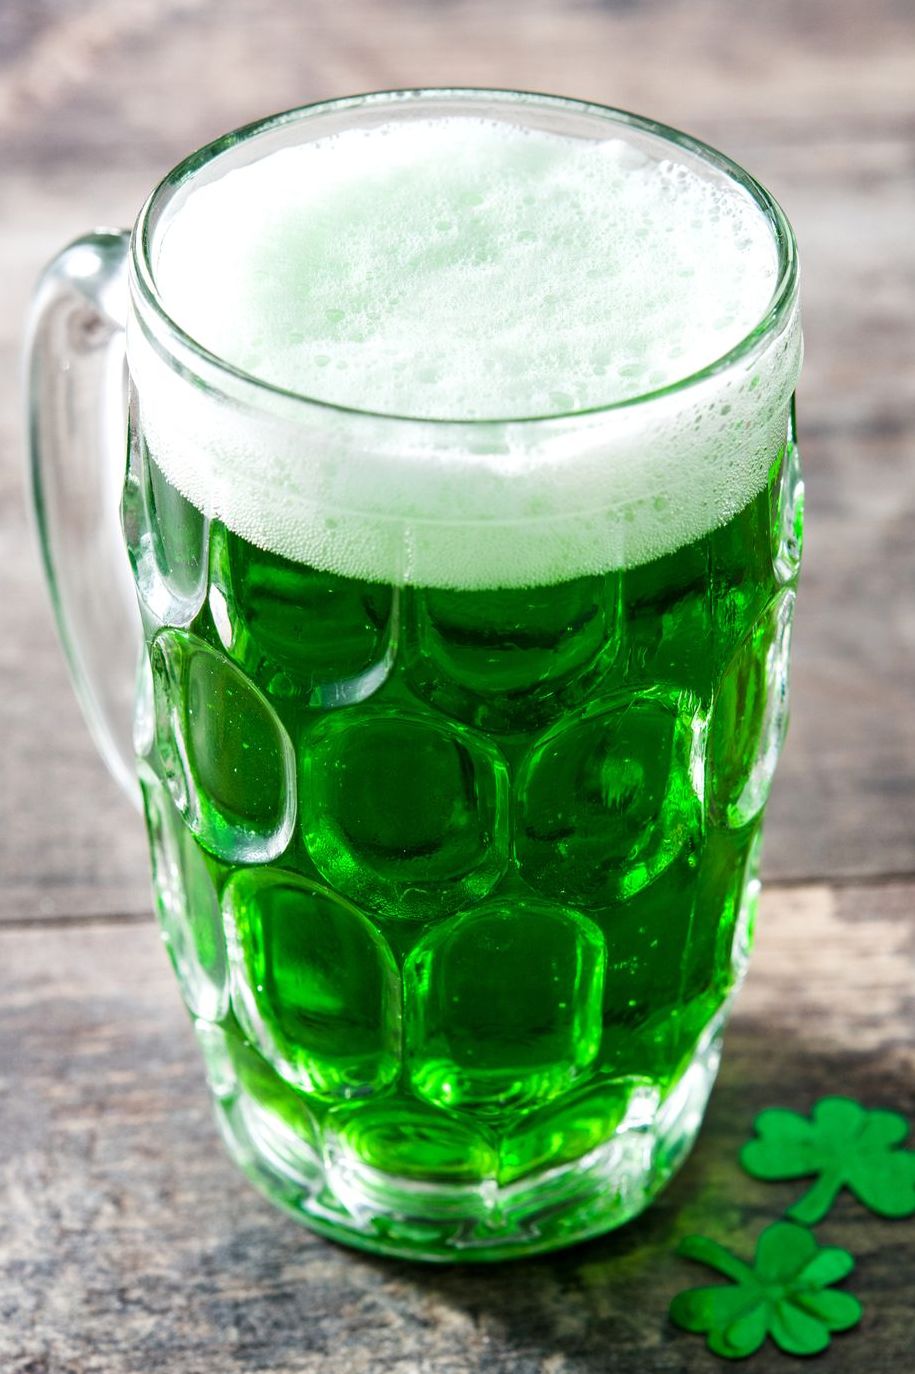 pint of green beer with clover decoration